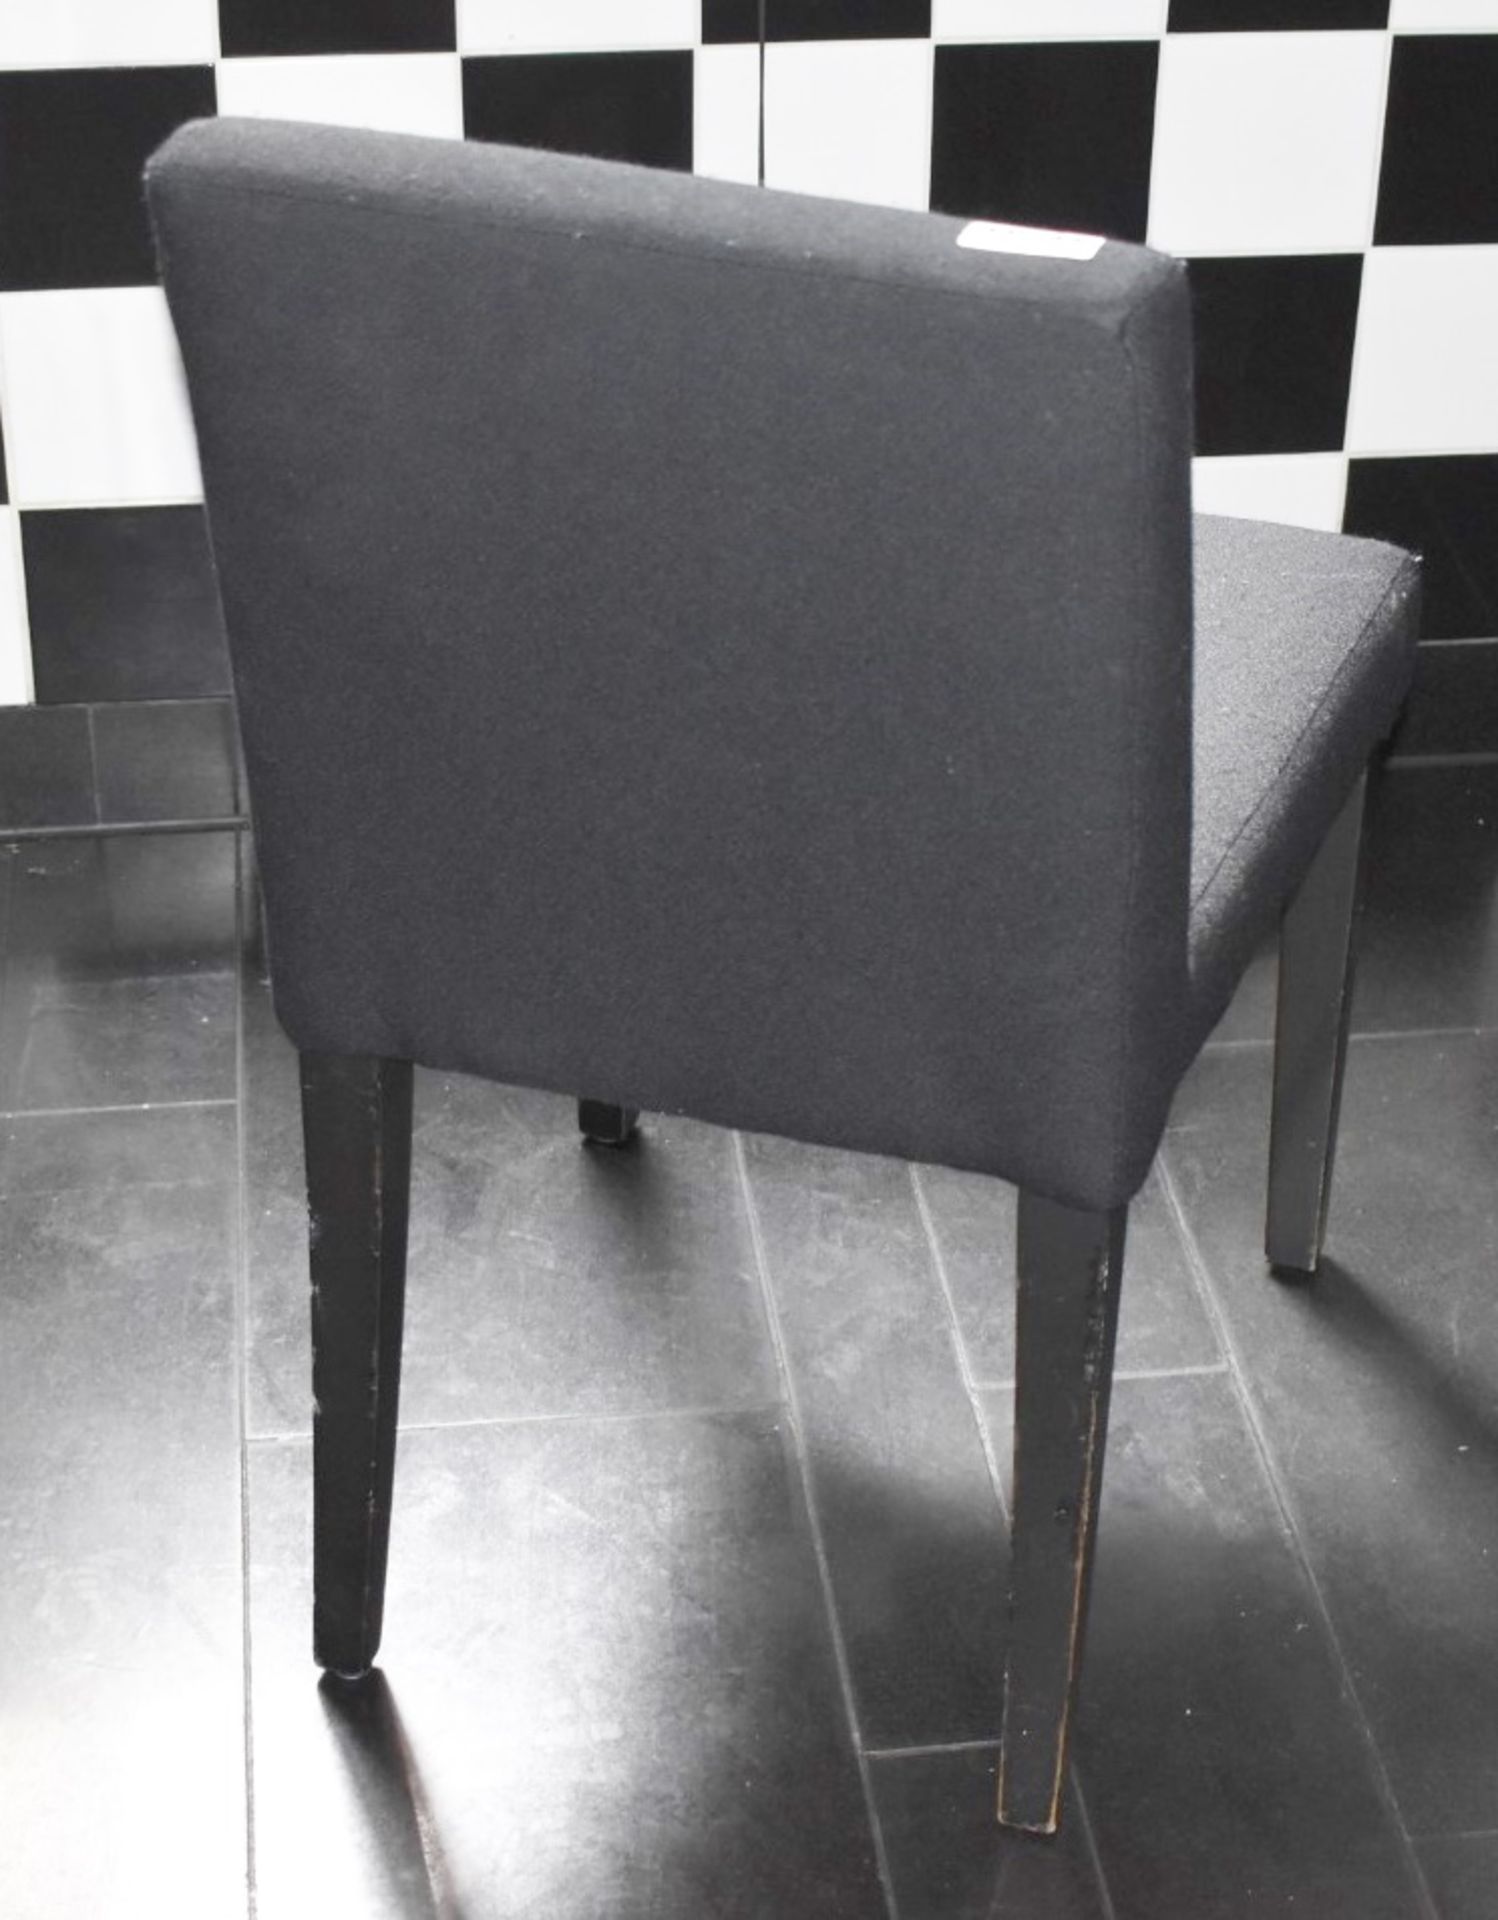 12 x Dark Grey Fabric Restaurant Dining Chairs - Dimensions: H84 x W45 x D52cm - CL392 - Ref LD144 - Image 3 of 3